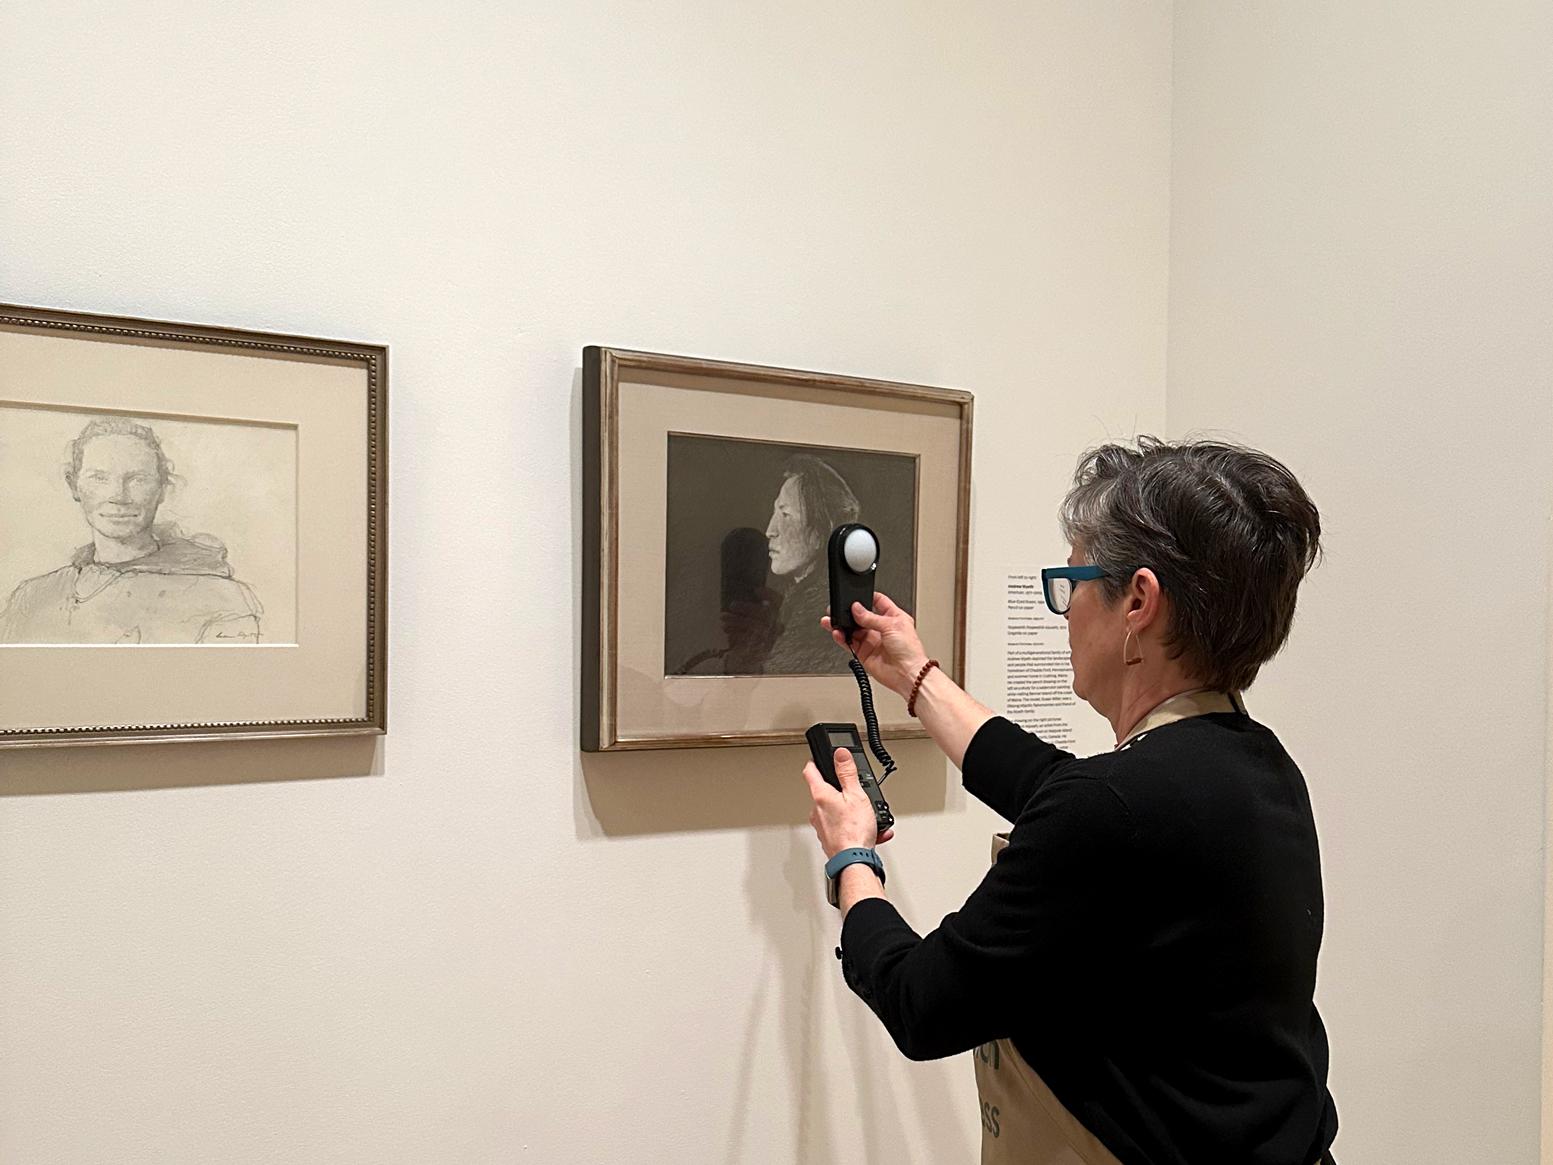 A woman holds a light meter in front of an artwork on paper hung on a gallery wall